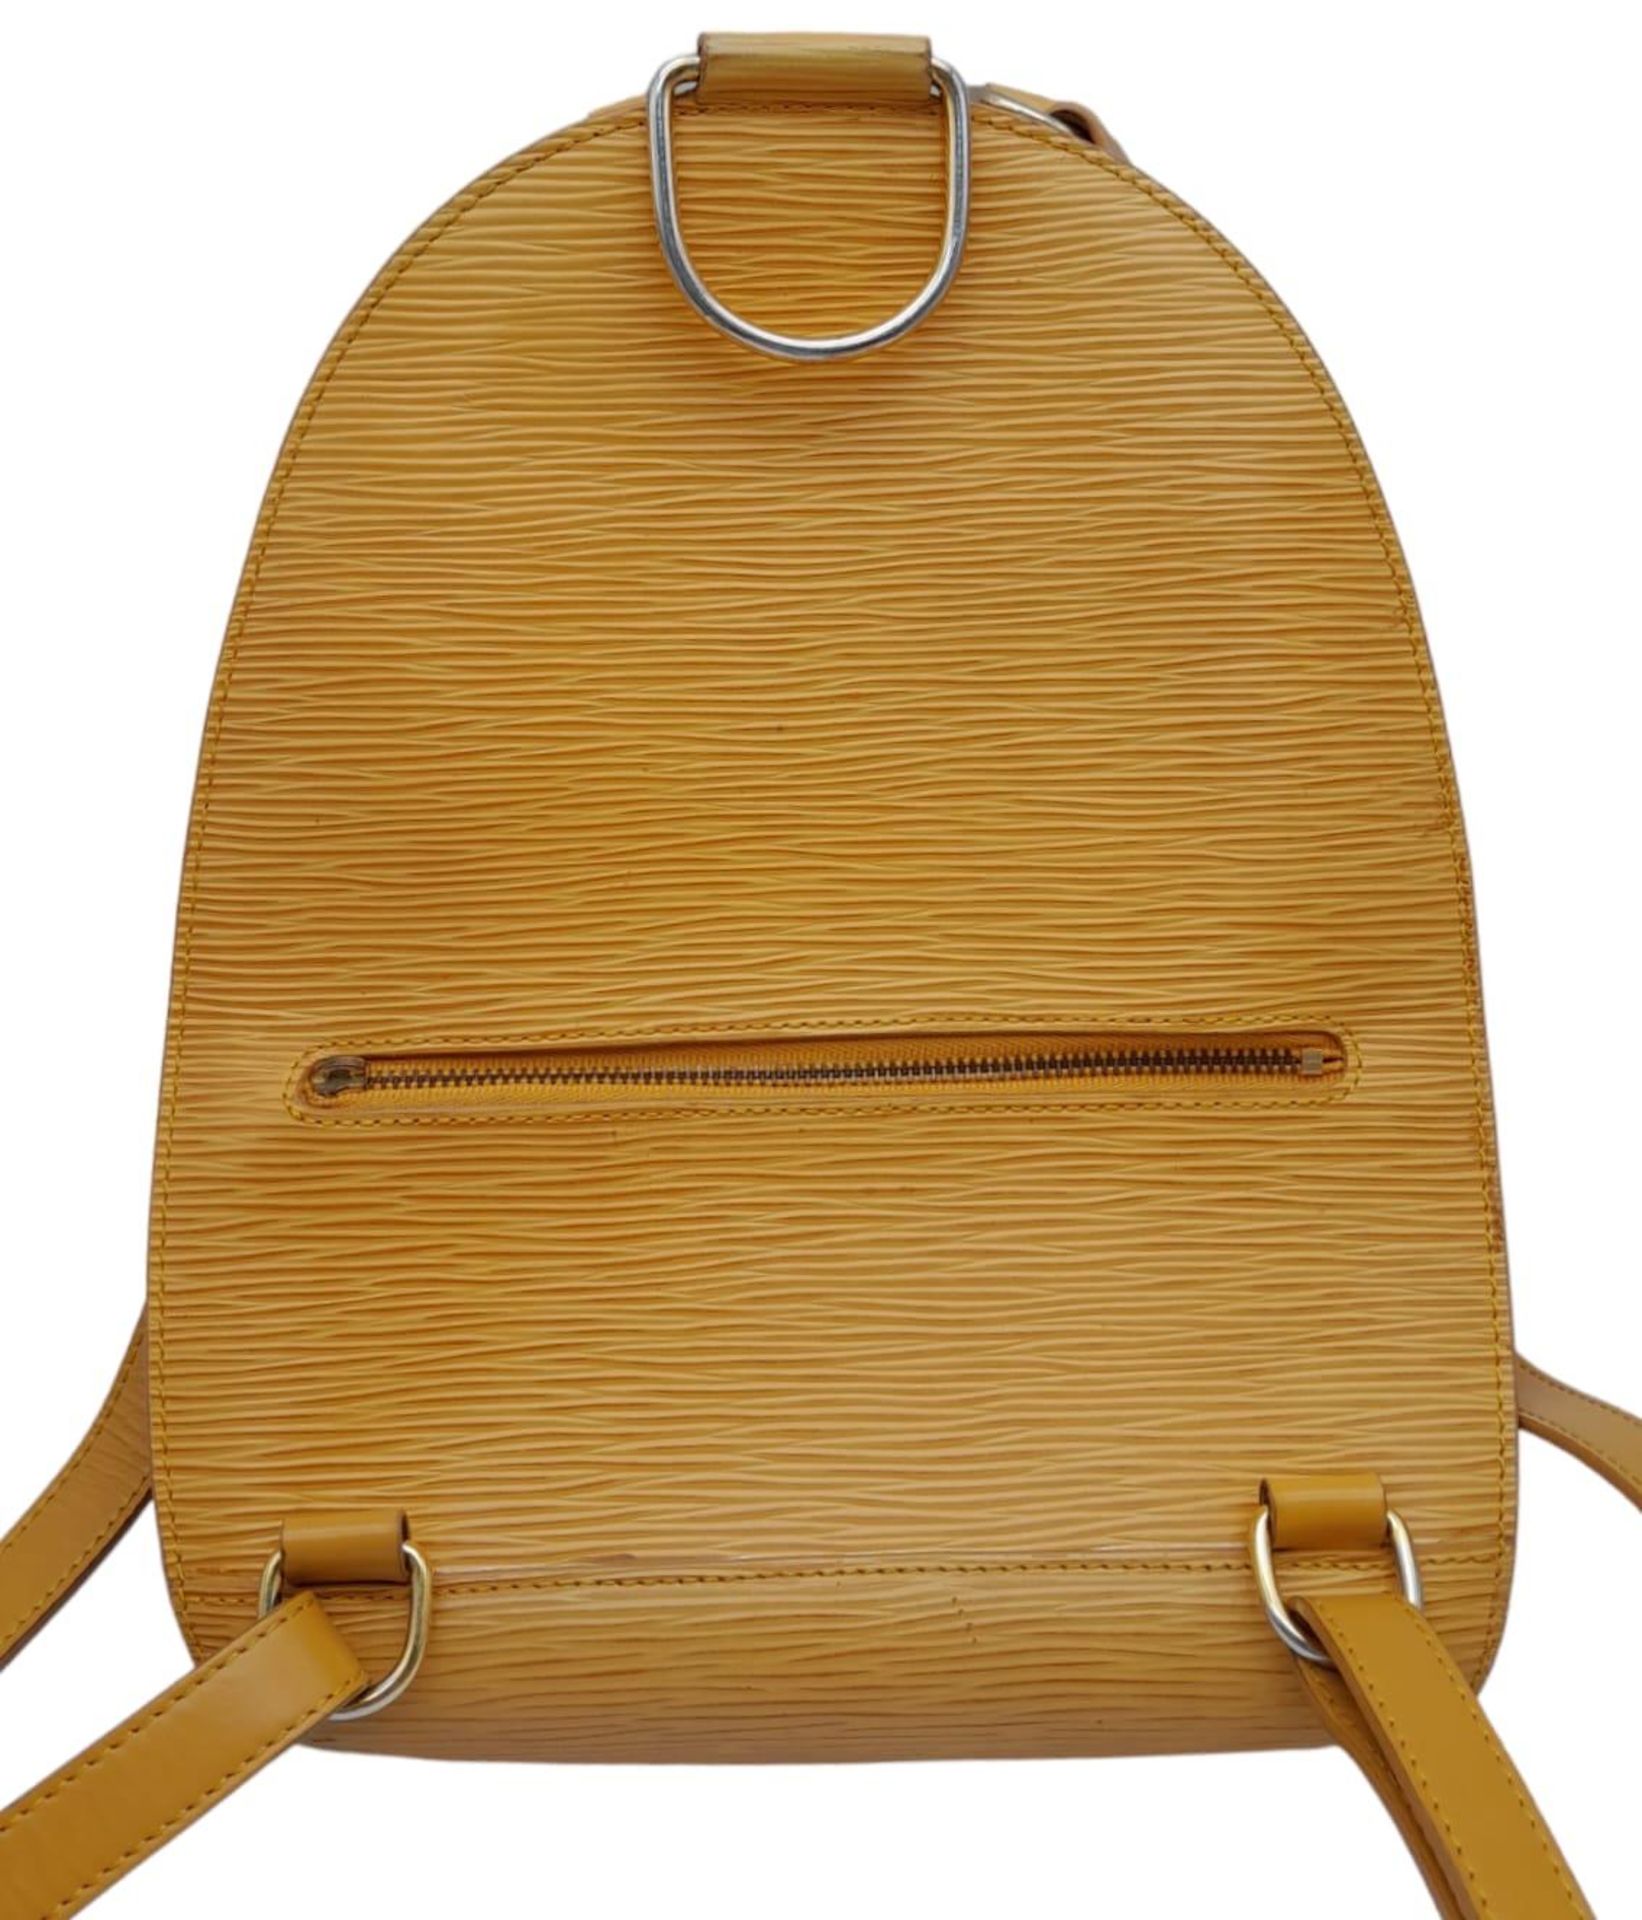 A Louis Vuitton Yellow 'Mabillon' Backpack. Epi leather exterior with gold-toned hardware, the - Bild 3 aus 9